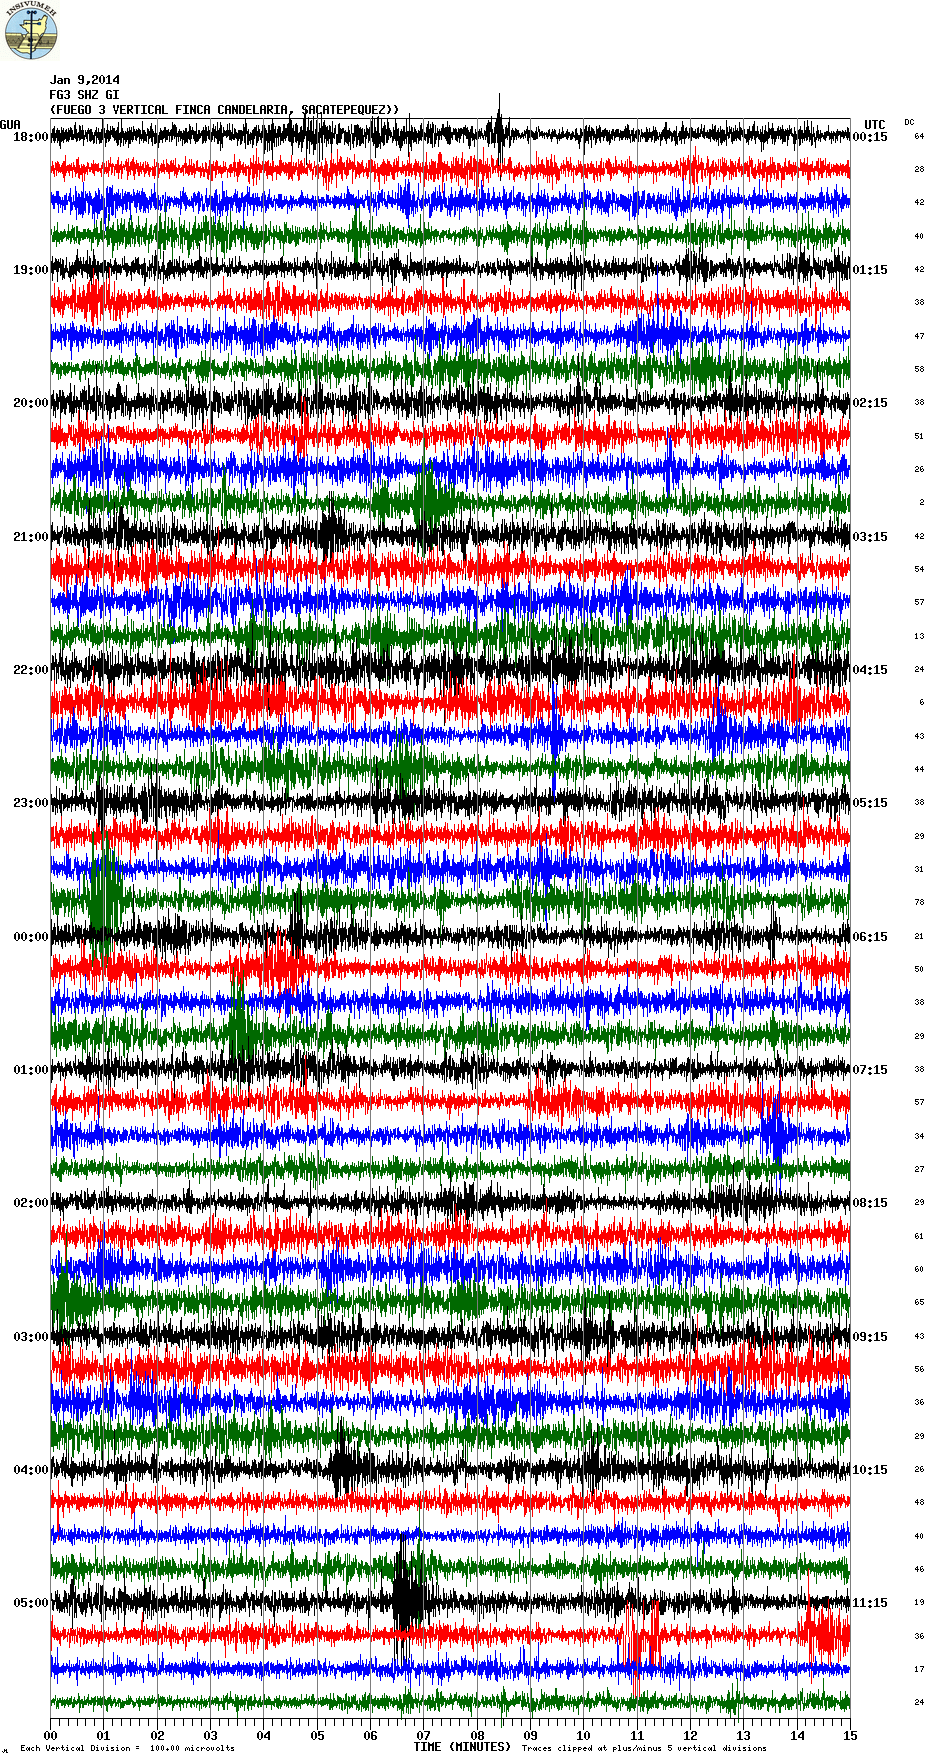 Seismic signal of Fuego today (FG3 station, INSIVUMEH)